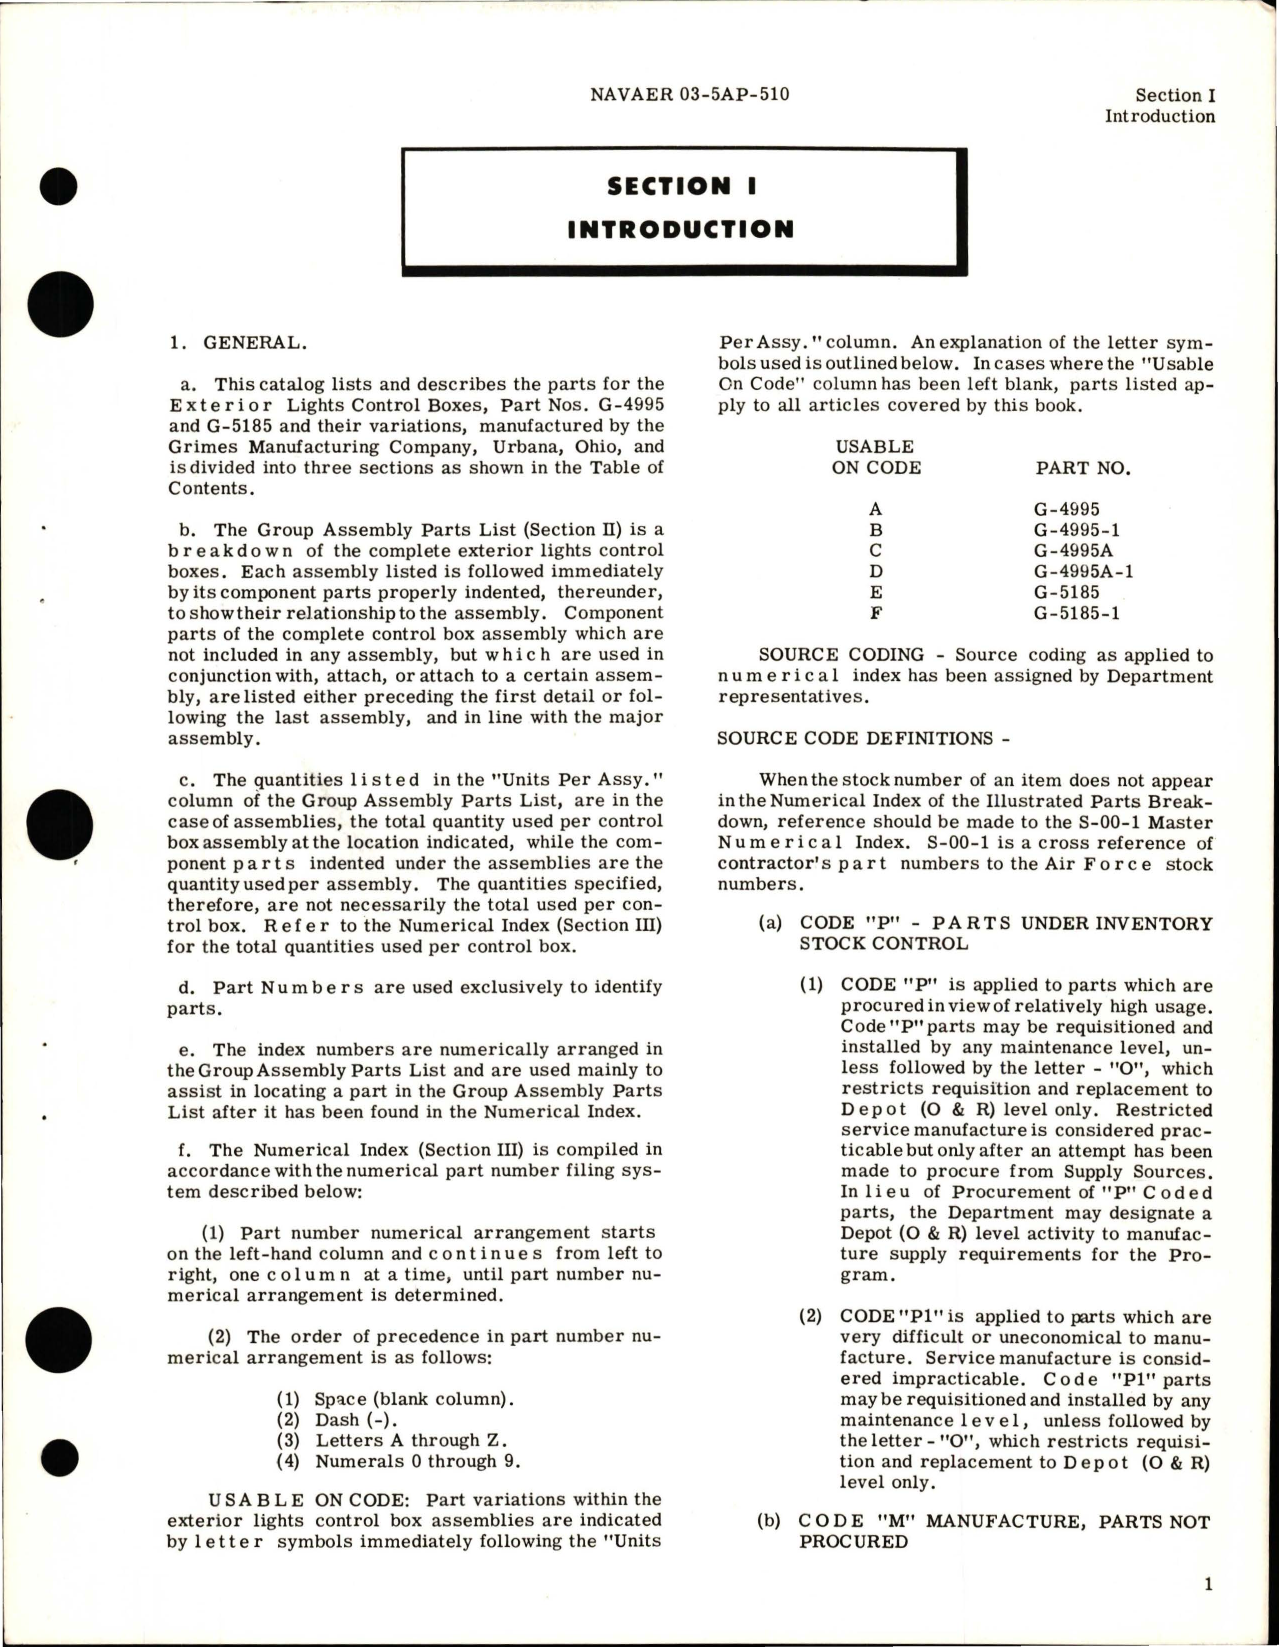 Sample page 5 from AirCorps Library document: Illustrated Parts Breakdown for Exterior Lights Control Box - Parts G-4995, G-4995-1, G-4995A, G-4995A-1, G-5185, and G-5185-1